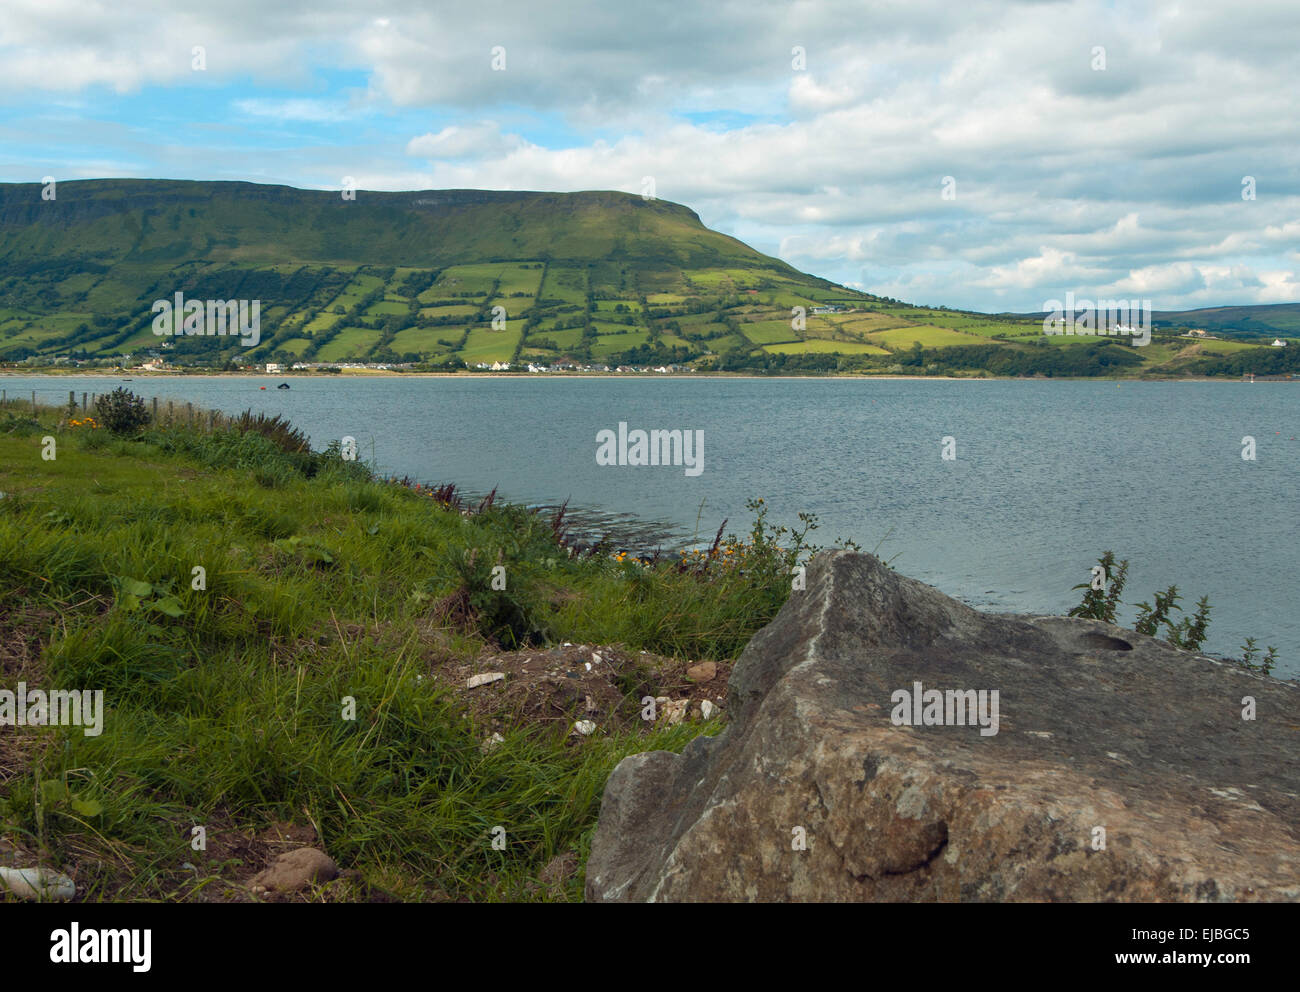 A scenic view in Glenariff, one of the seven Glens in County Antrim, Northern Ireland Stock Photo